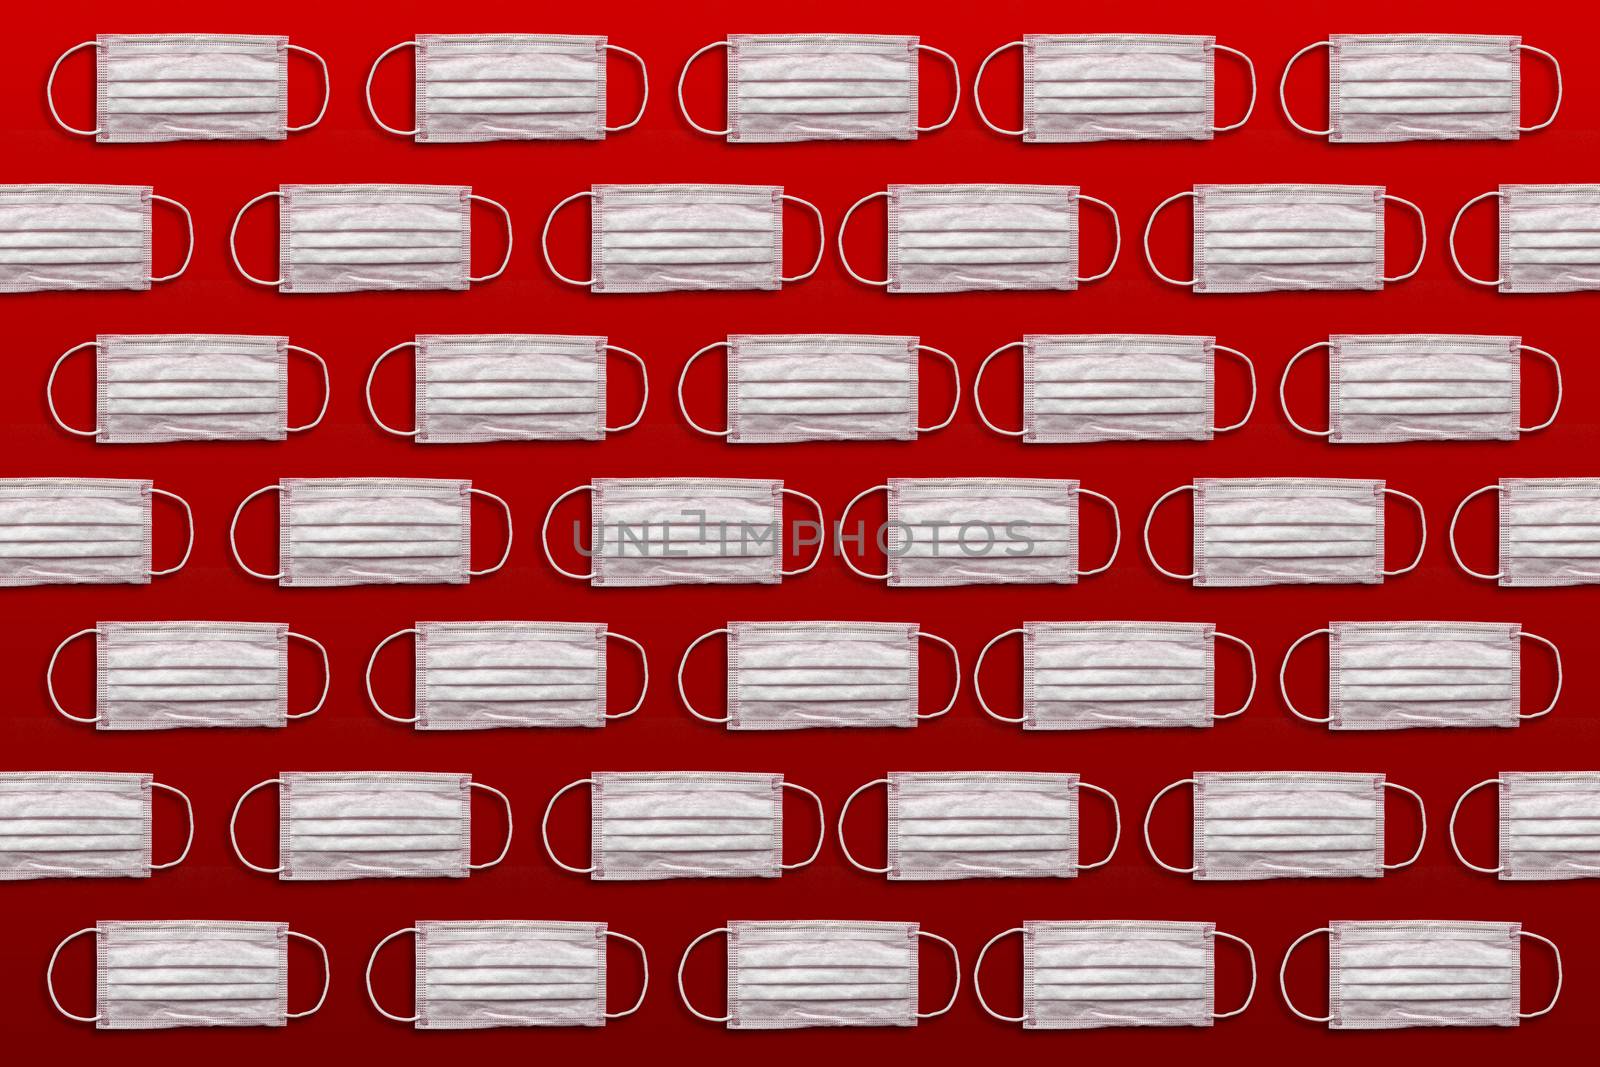 Face masks for first responders on a red background by oasisamuel